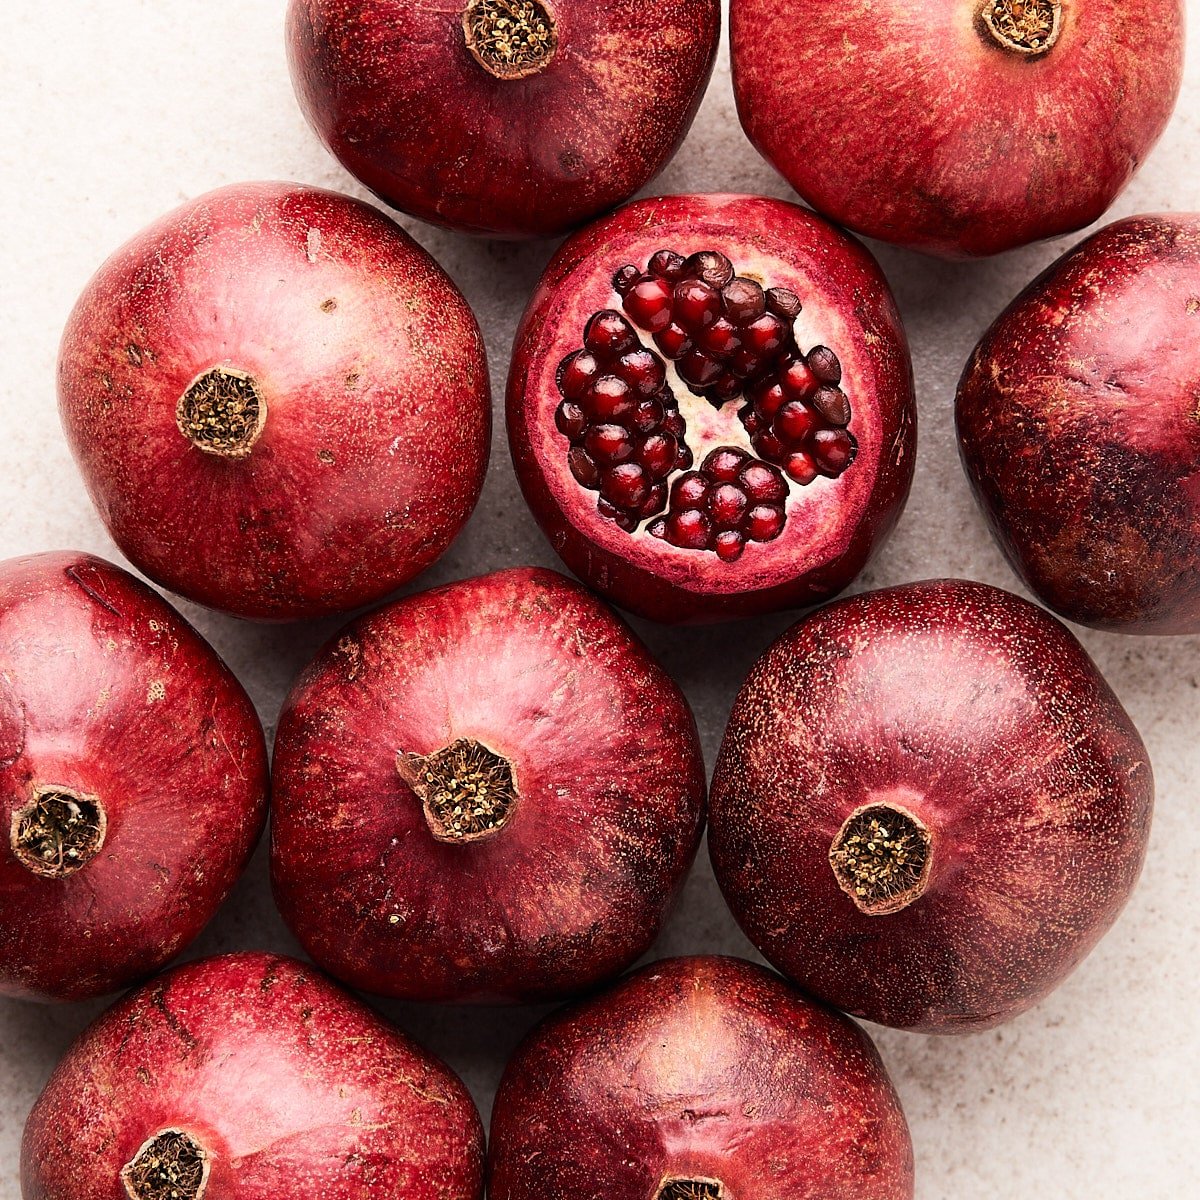 How to cut a pomegranate.